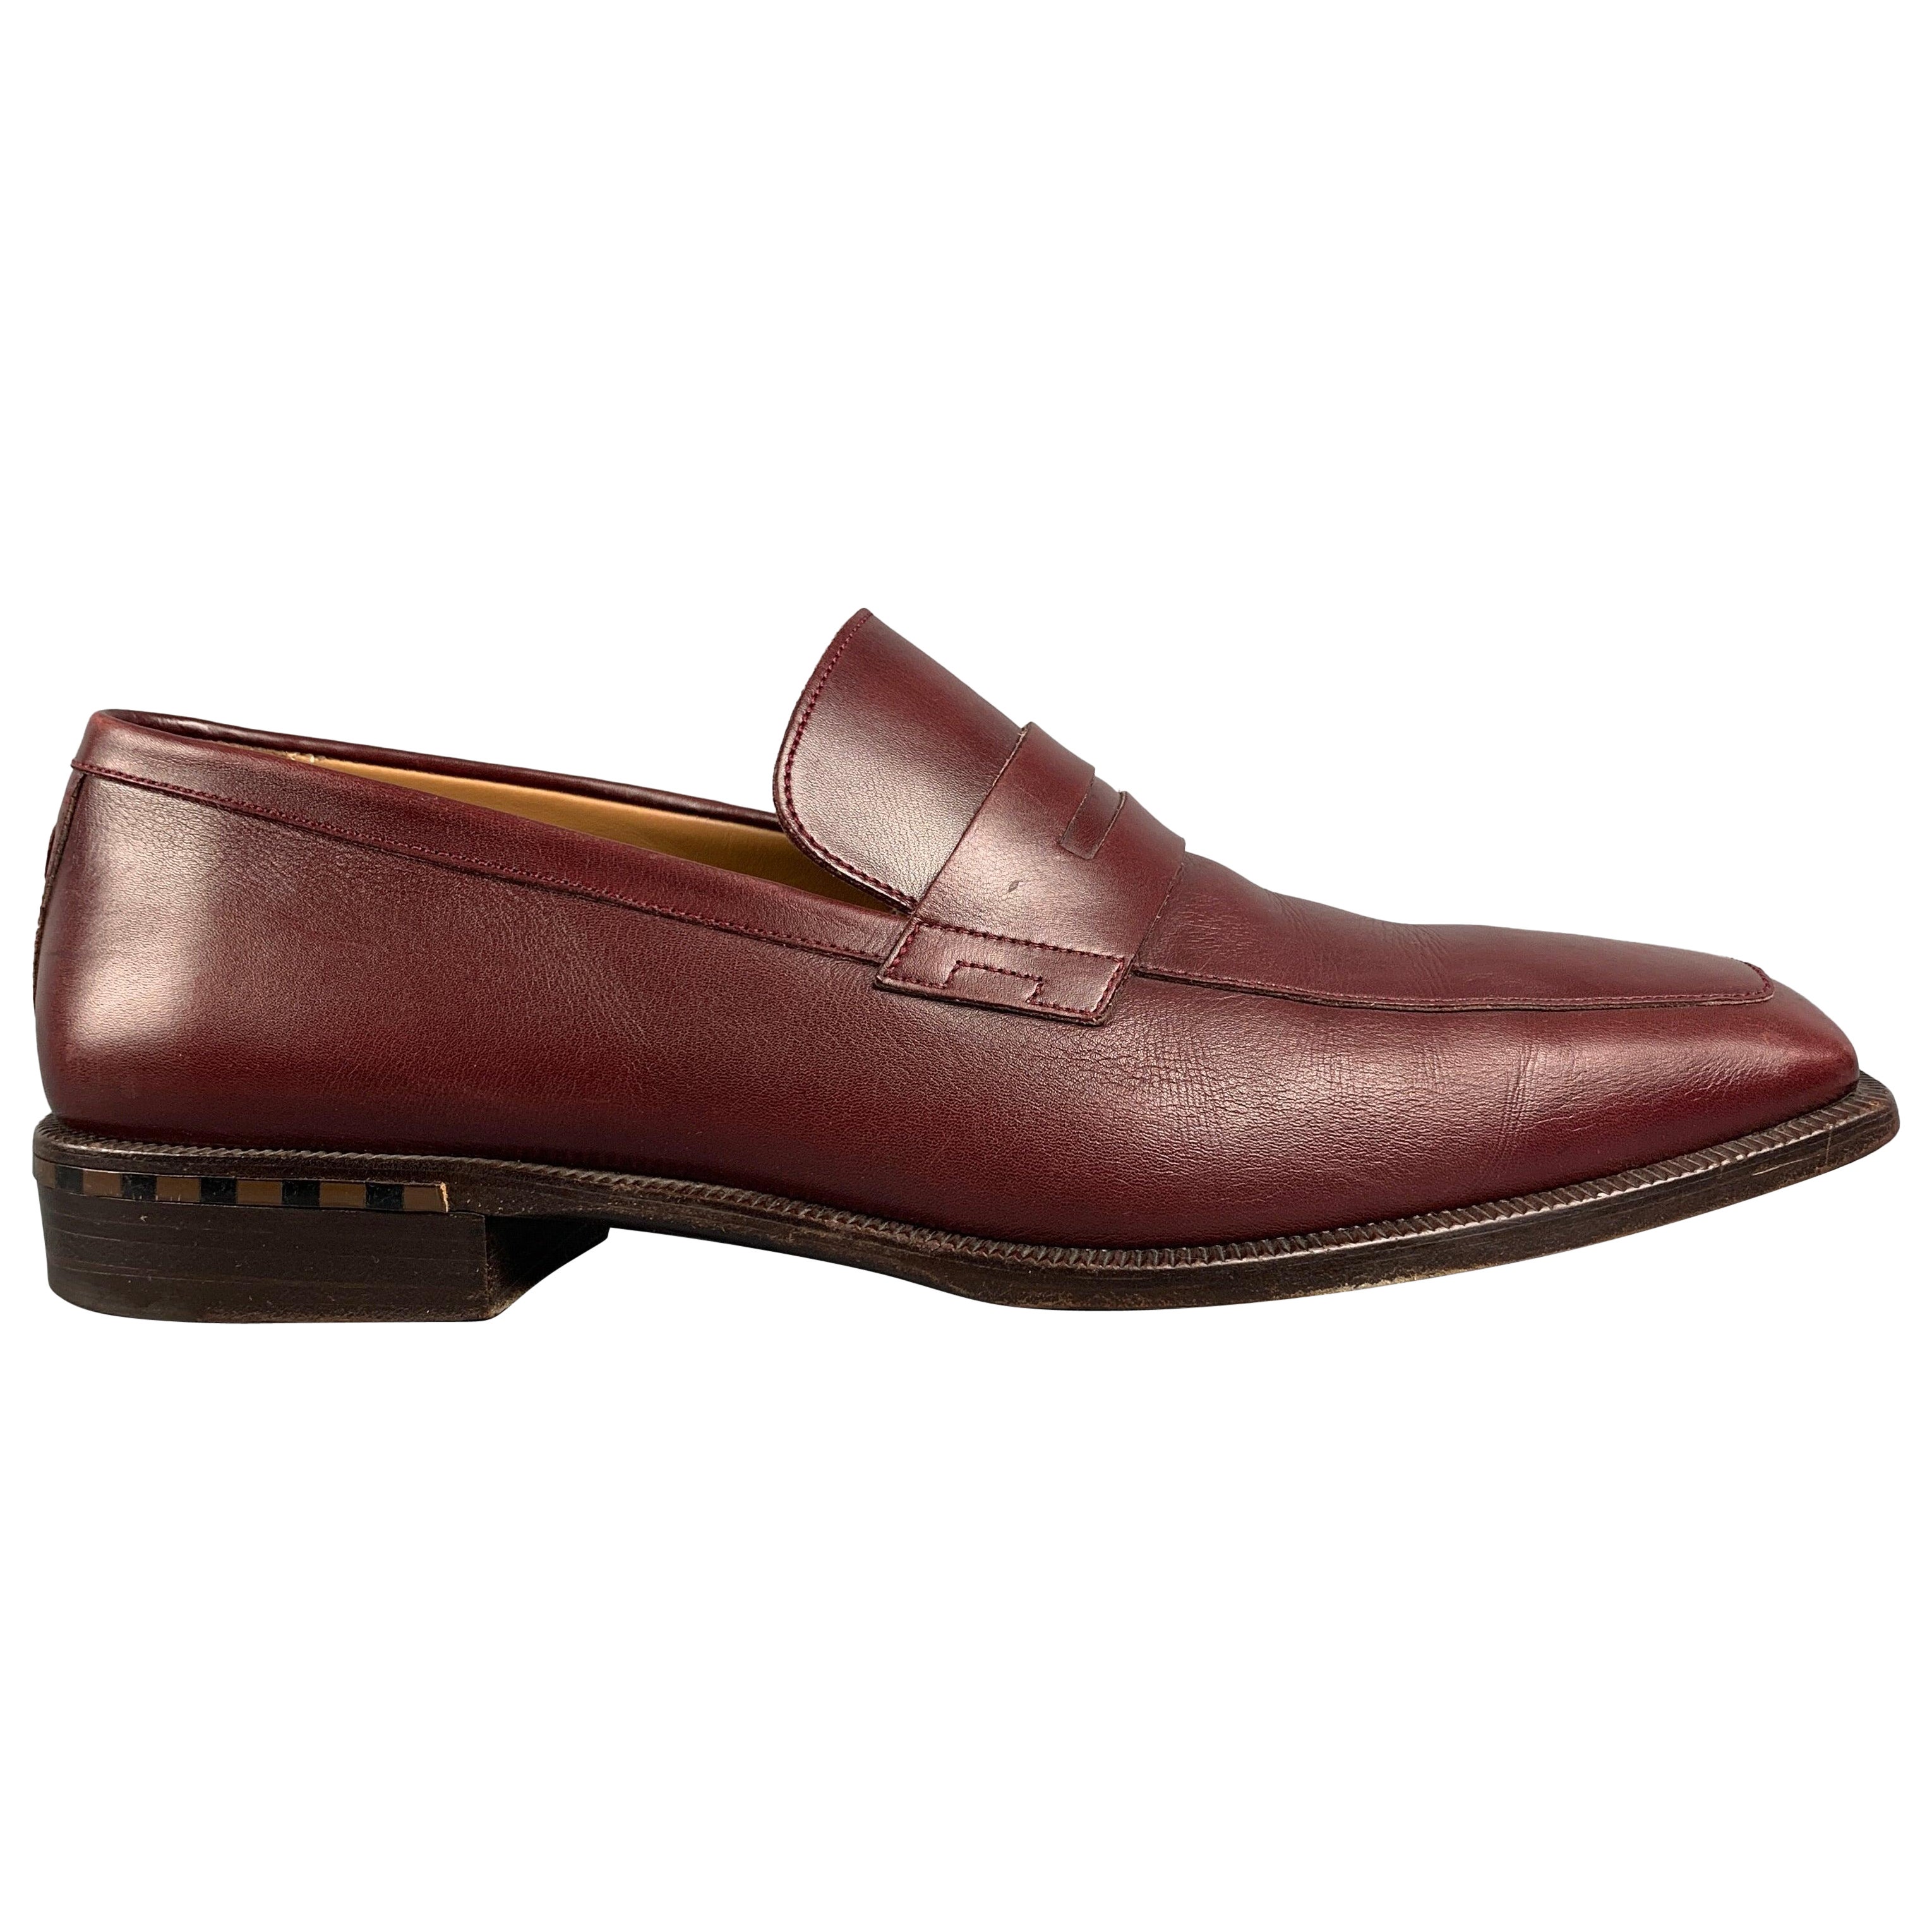 LOUIS VUITTON Size 10 Burgundy Leather Square Toe Loafers For Sale